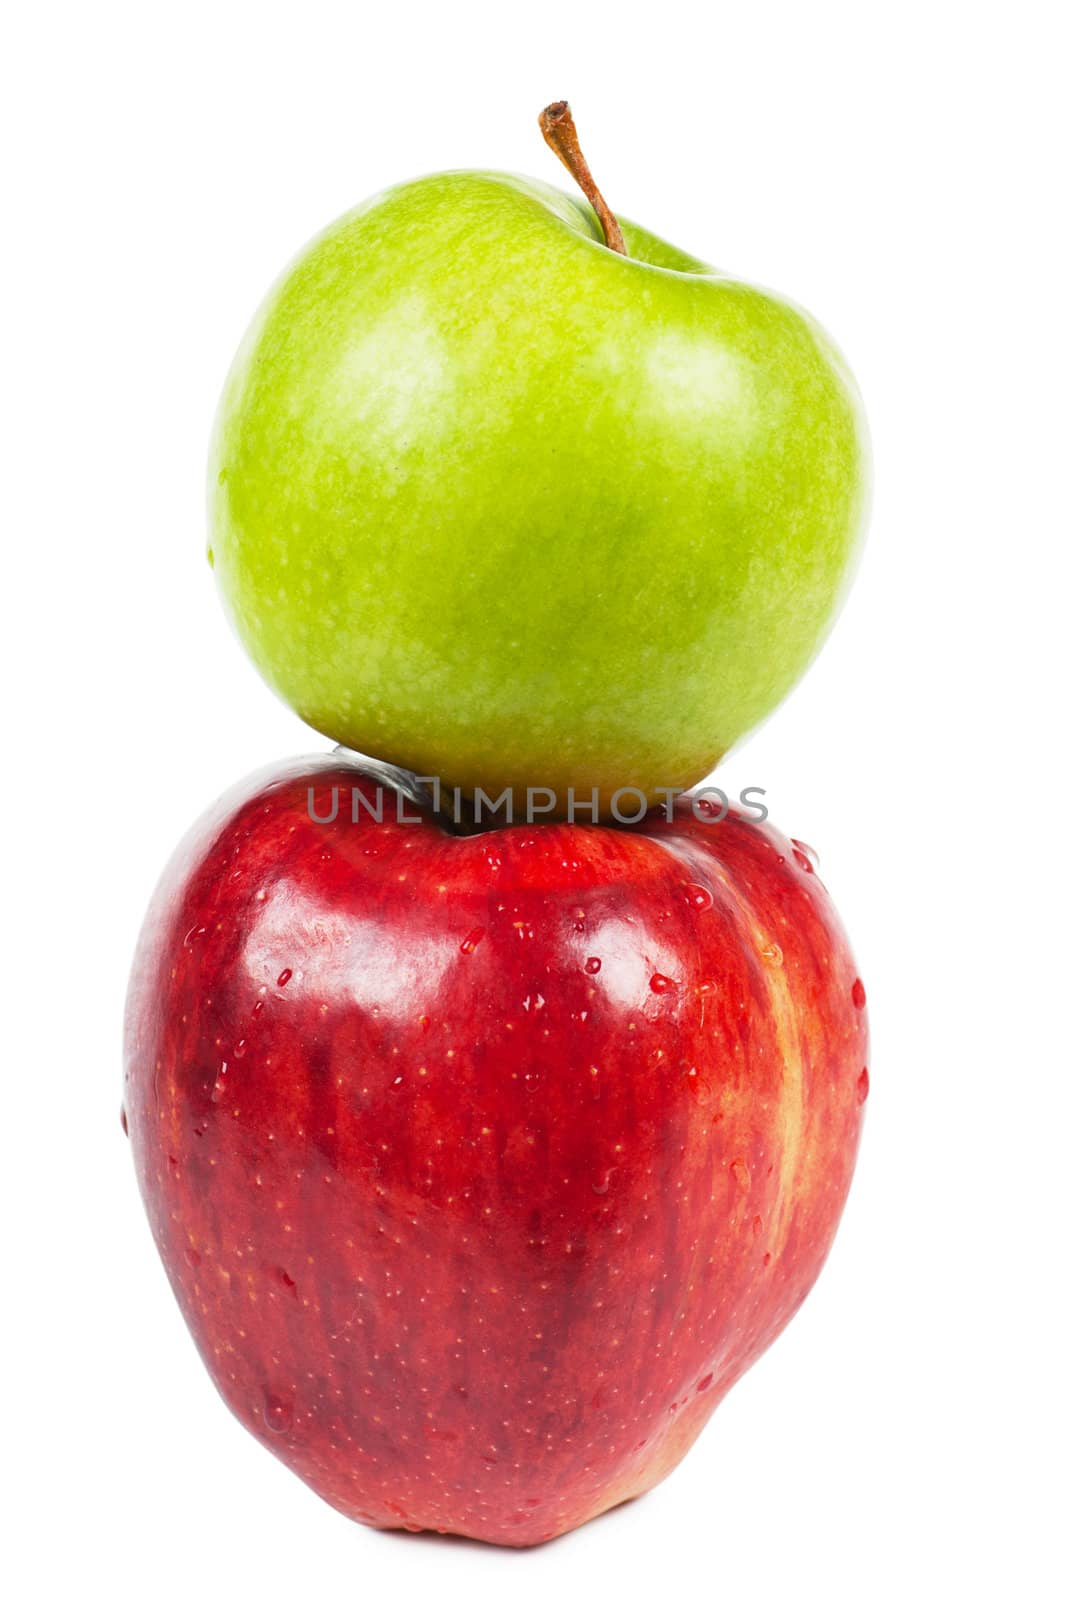 Two apples (red and green) isolated over white background